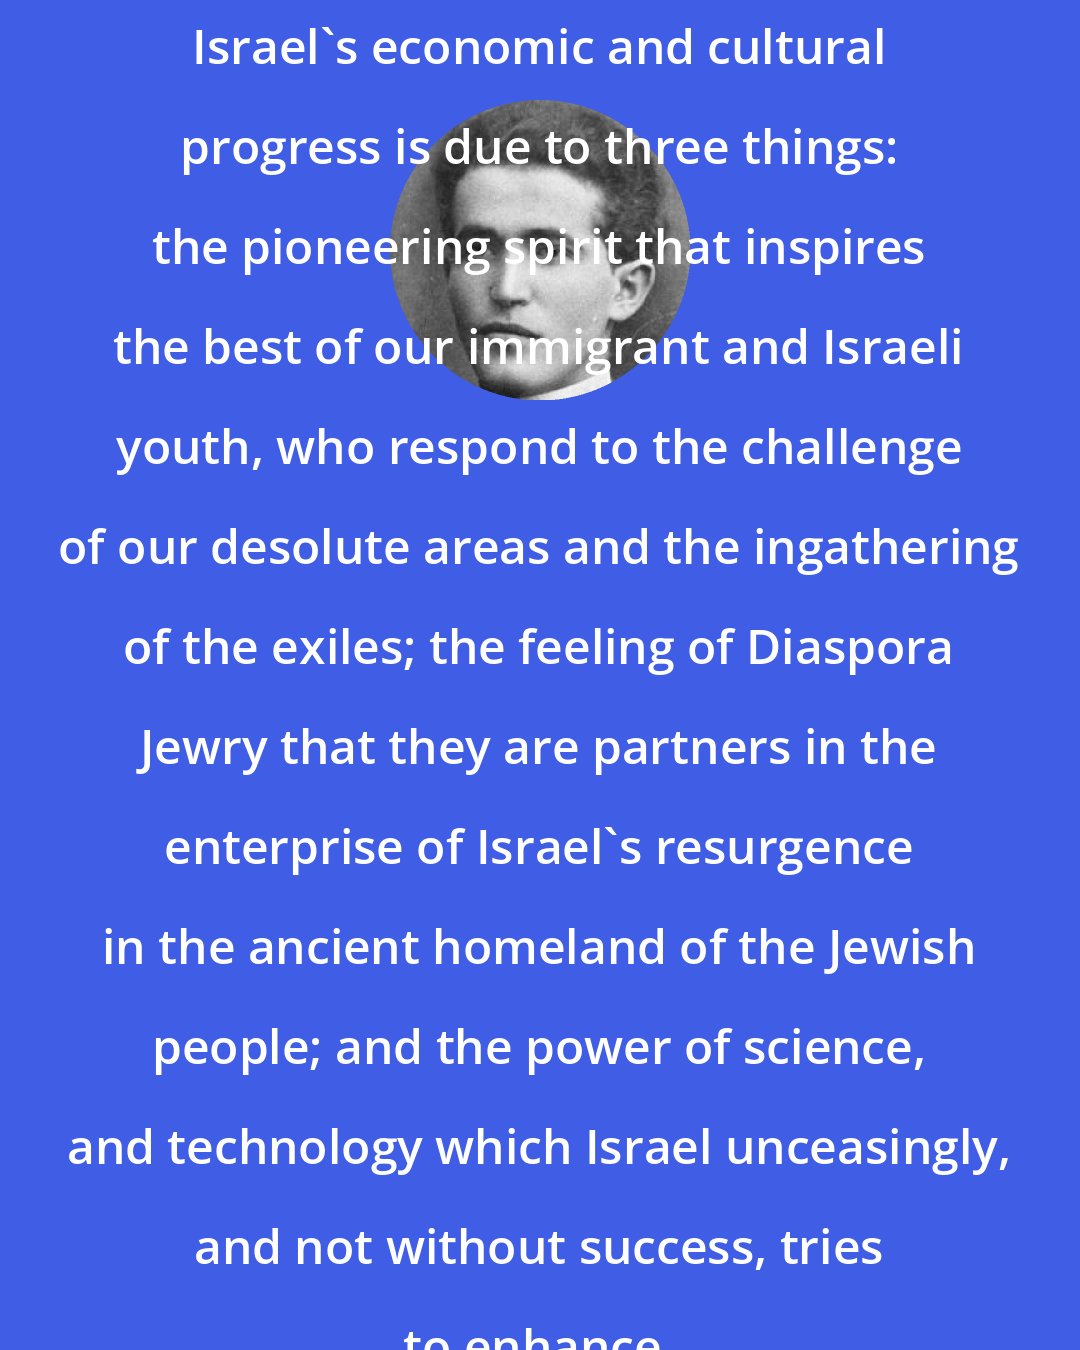 David Ben-Gurion: Israel's economic and cultural progress is due to three things: the pioneering spirit that inspires the best of our immigrant and Israeli youth, who respond to the challenge of our desolute areas and the ingathering of the exiles; the feeling of Diaspora Jewry that they are partners in the enterprise of Israel's resurgence in the ancient homeland of the Jewish people; and the power of science, and technology which Israel unceasingly, and not without success, tries to enhance.